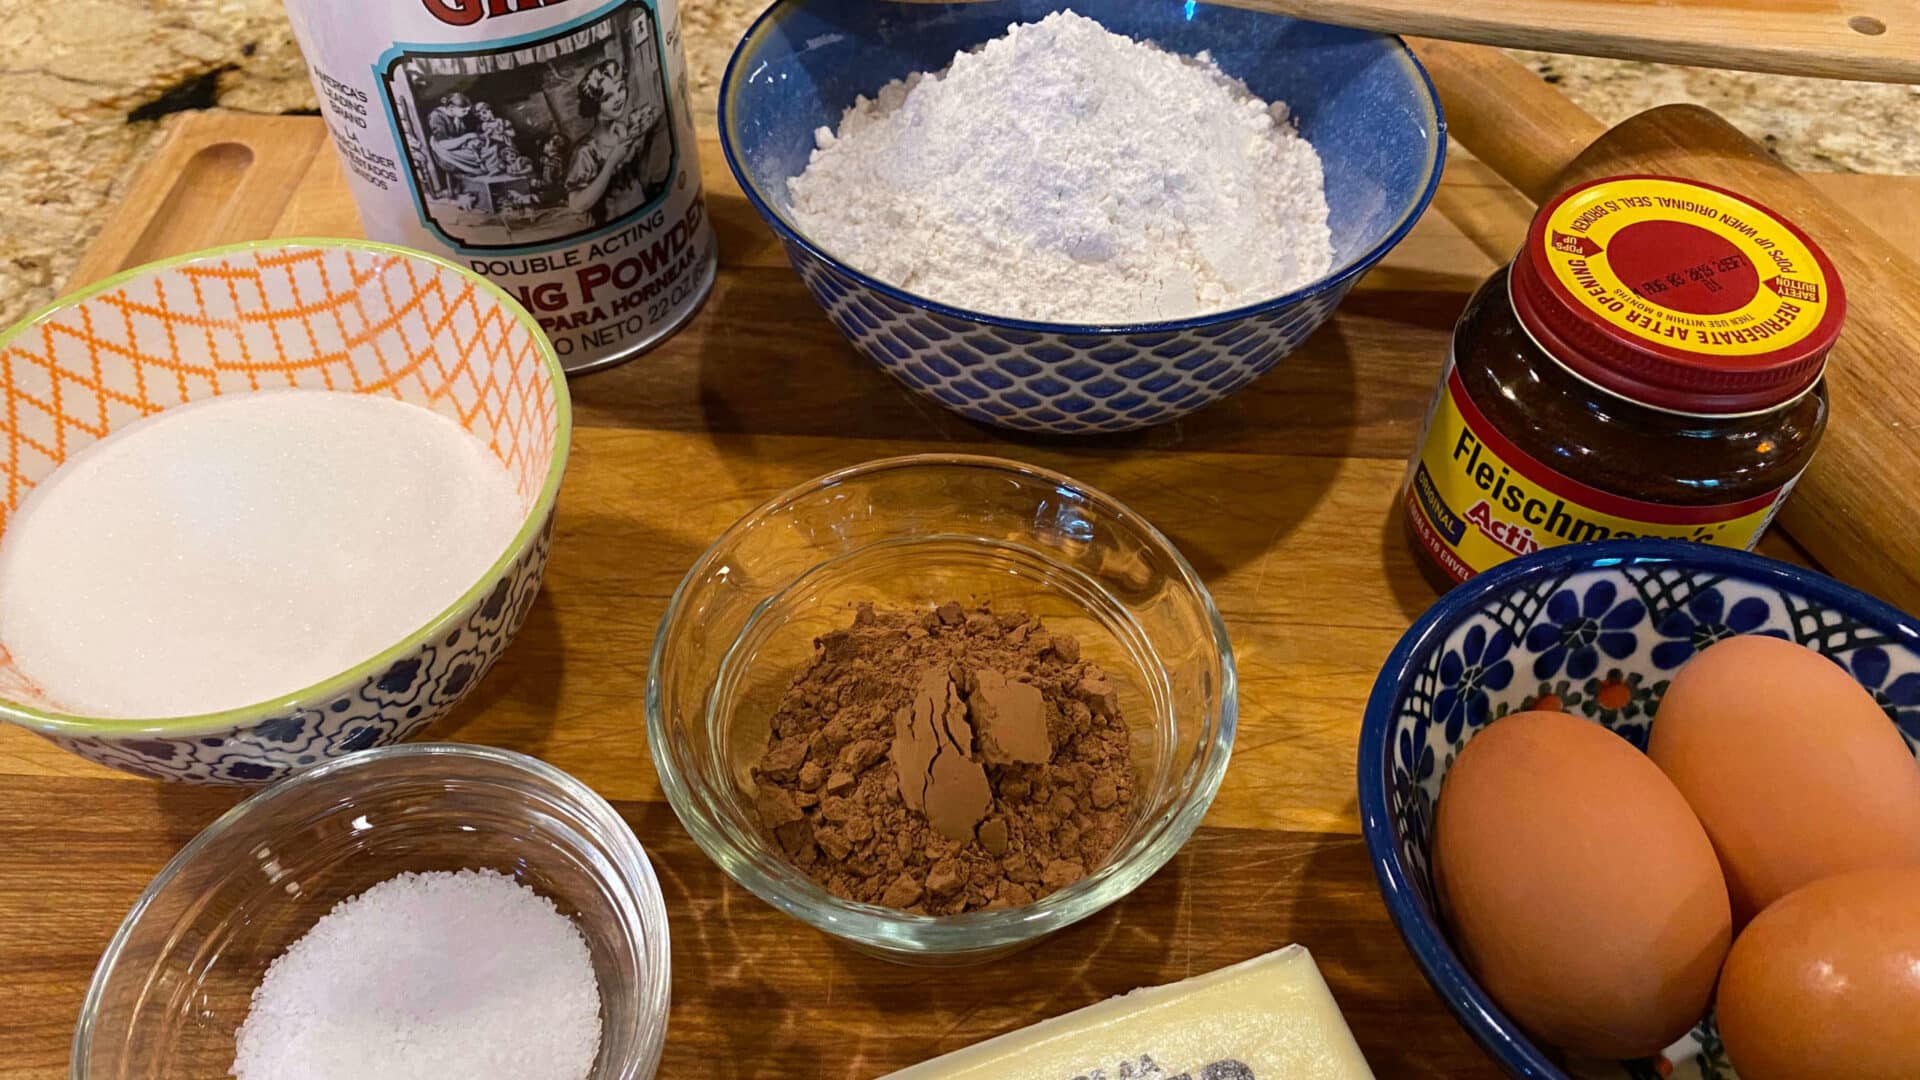 Baking Ingredients of flour, baking powder, yeast, cocoa, sugar, salt, eggs and butter, with a wooden rolling pin and wooden spoon